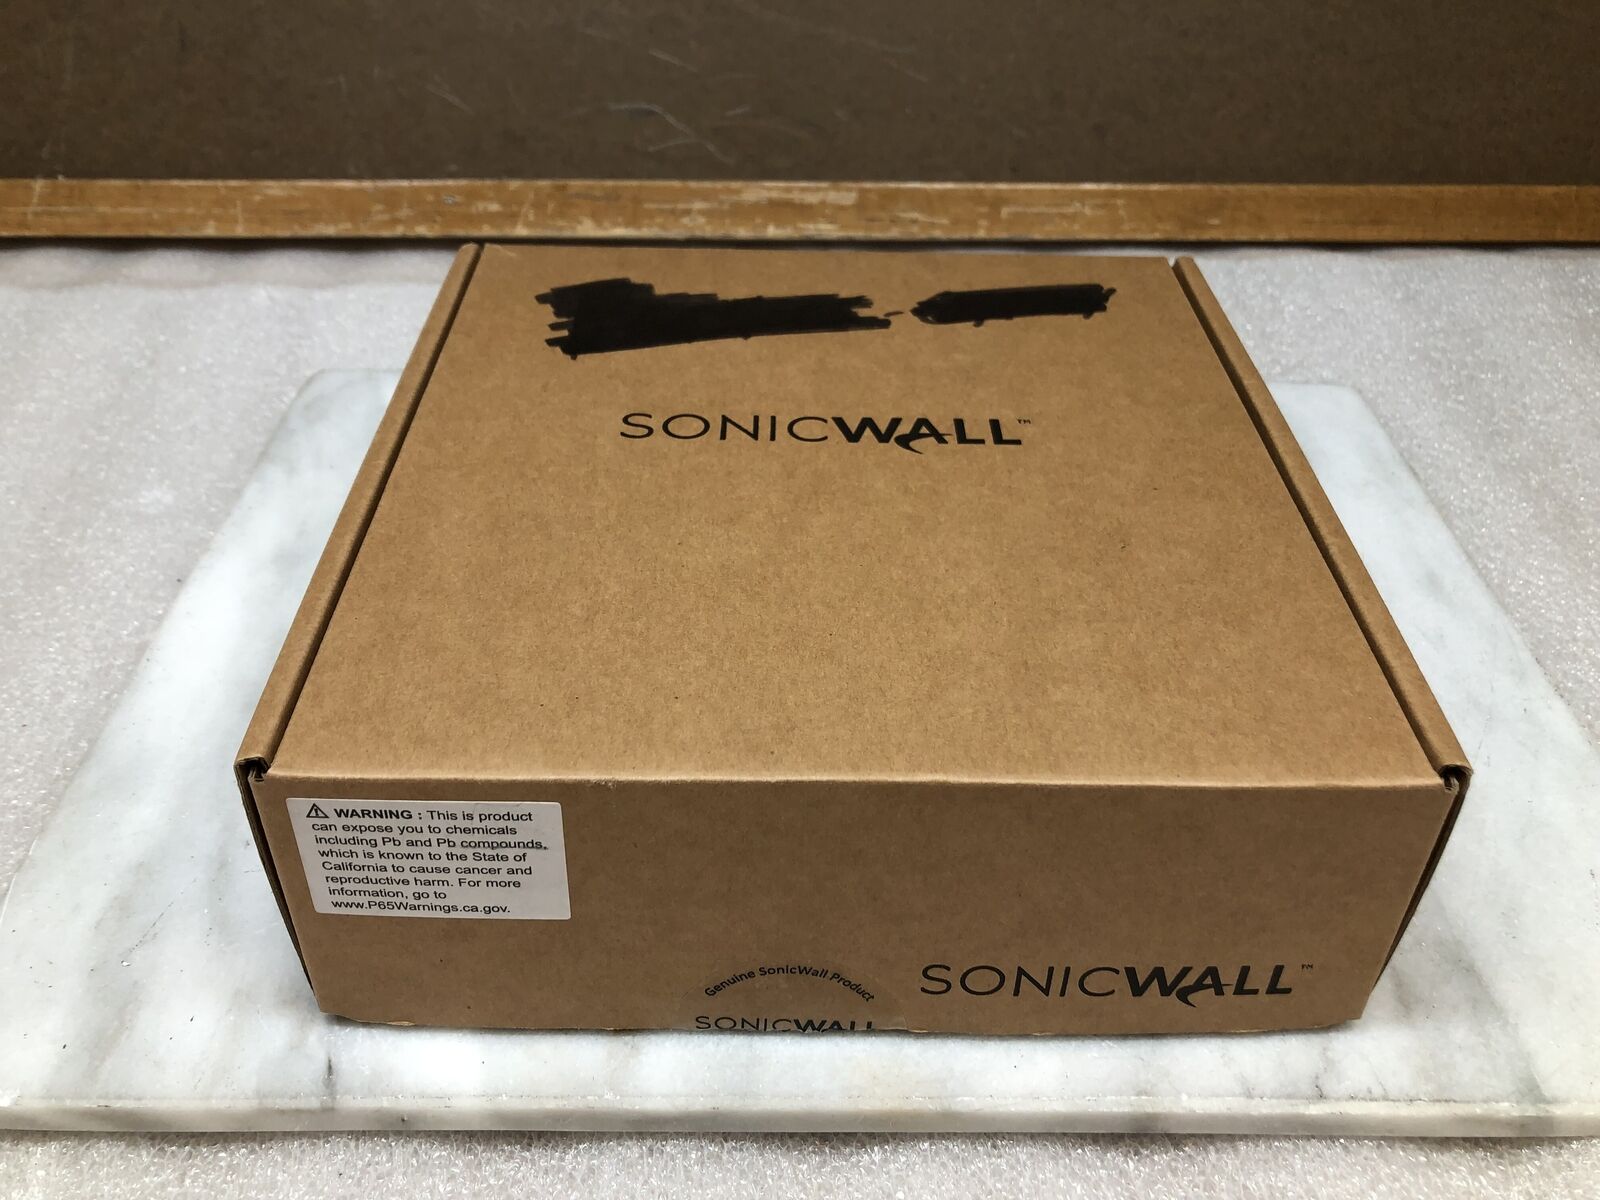 NOB Dell Sonicwall APL31-0B9 SOHO Firewall Wireless Network Security Appliance